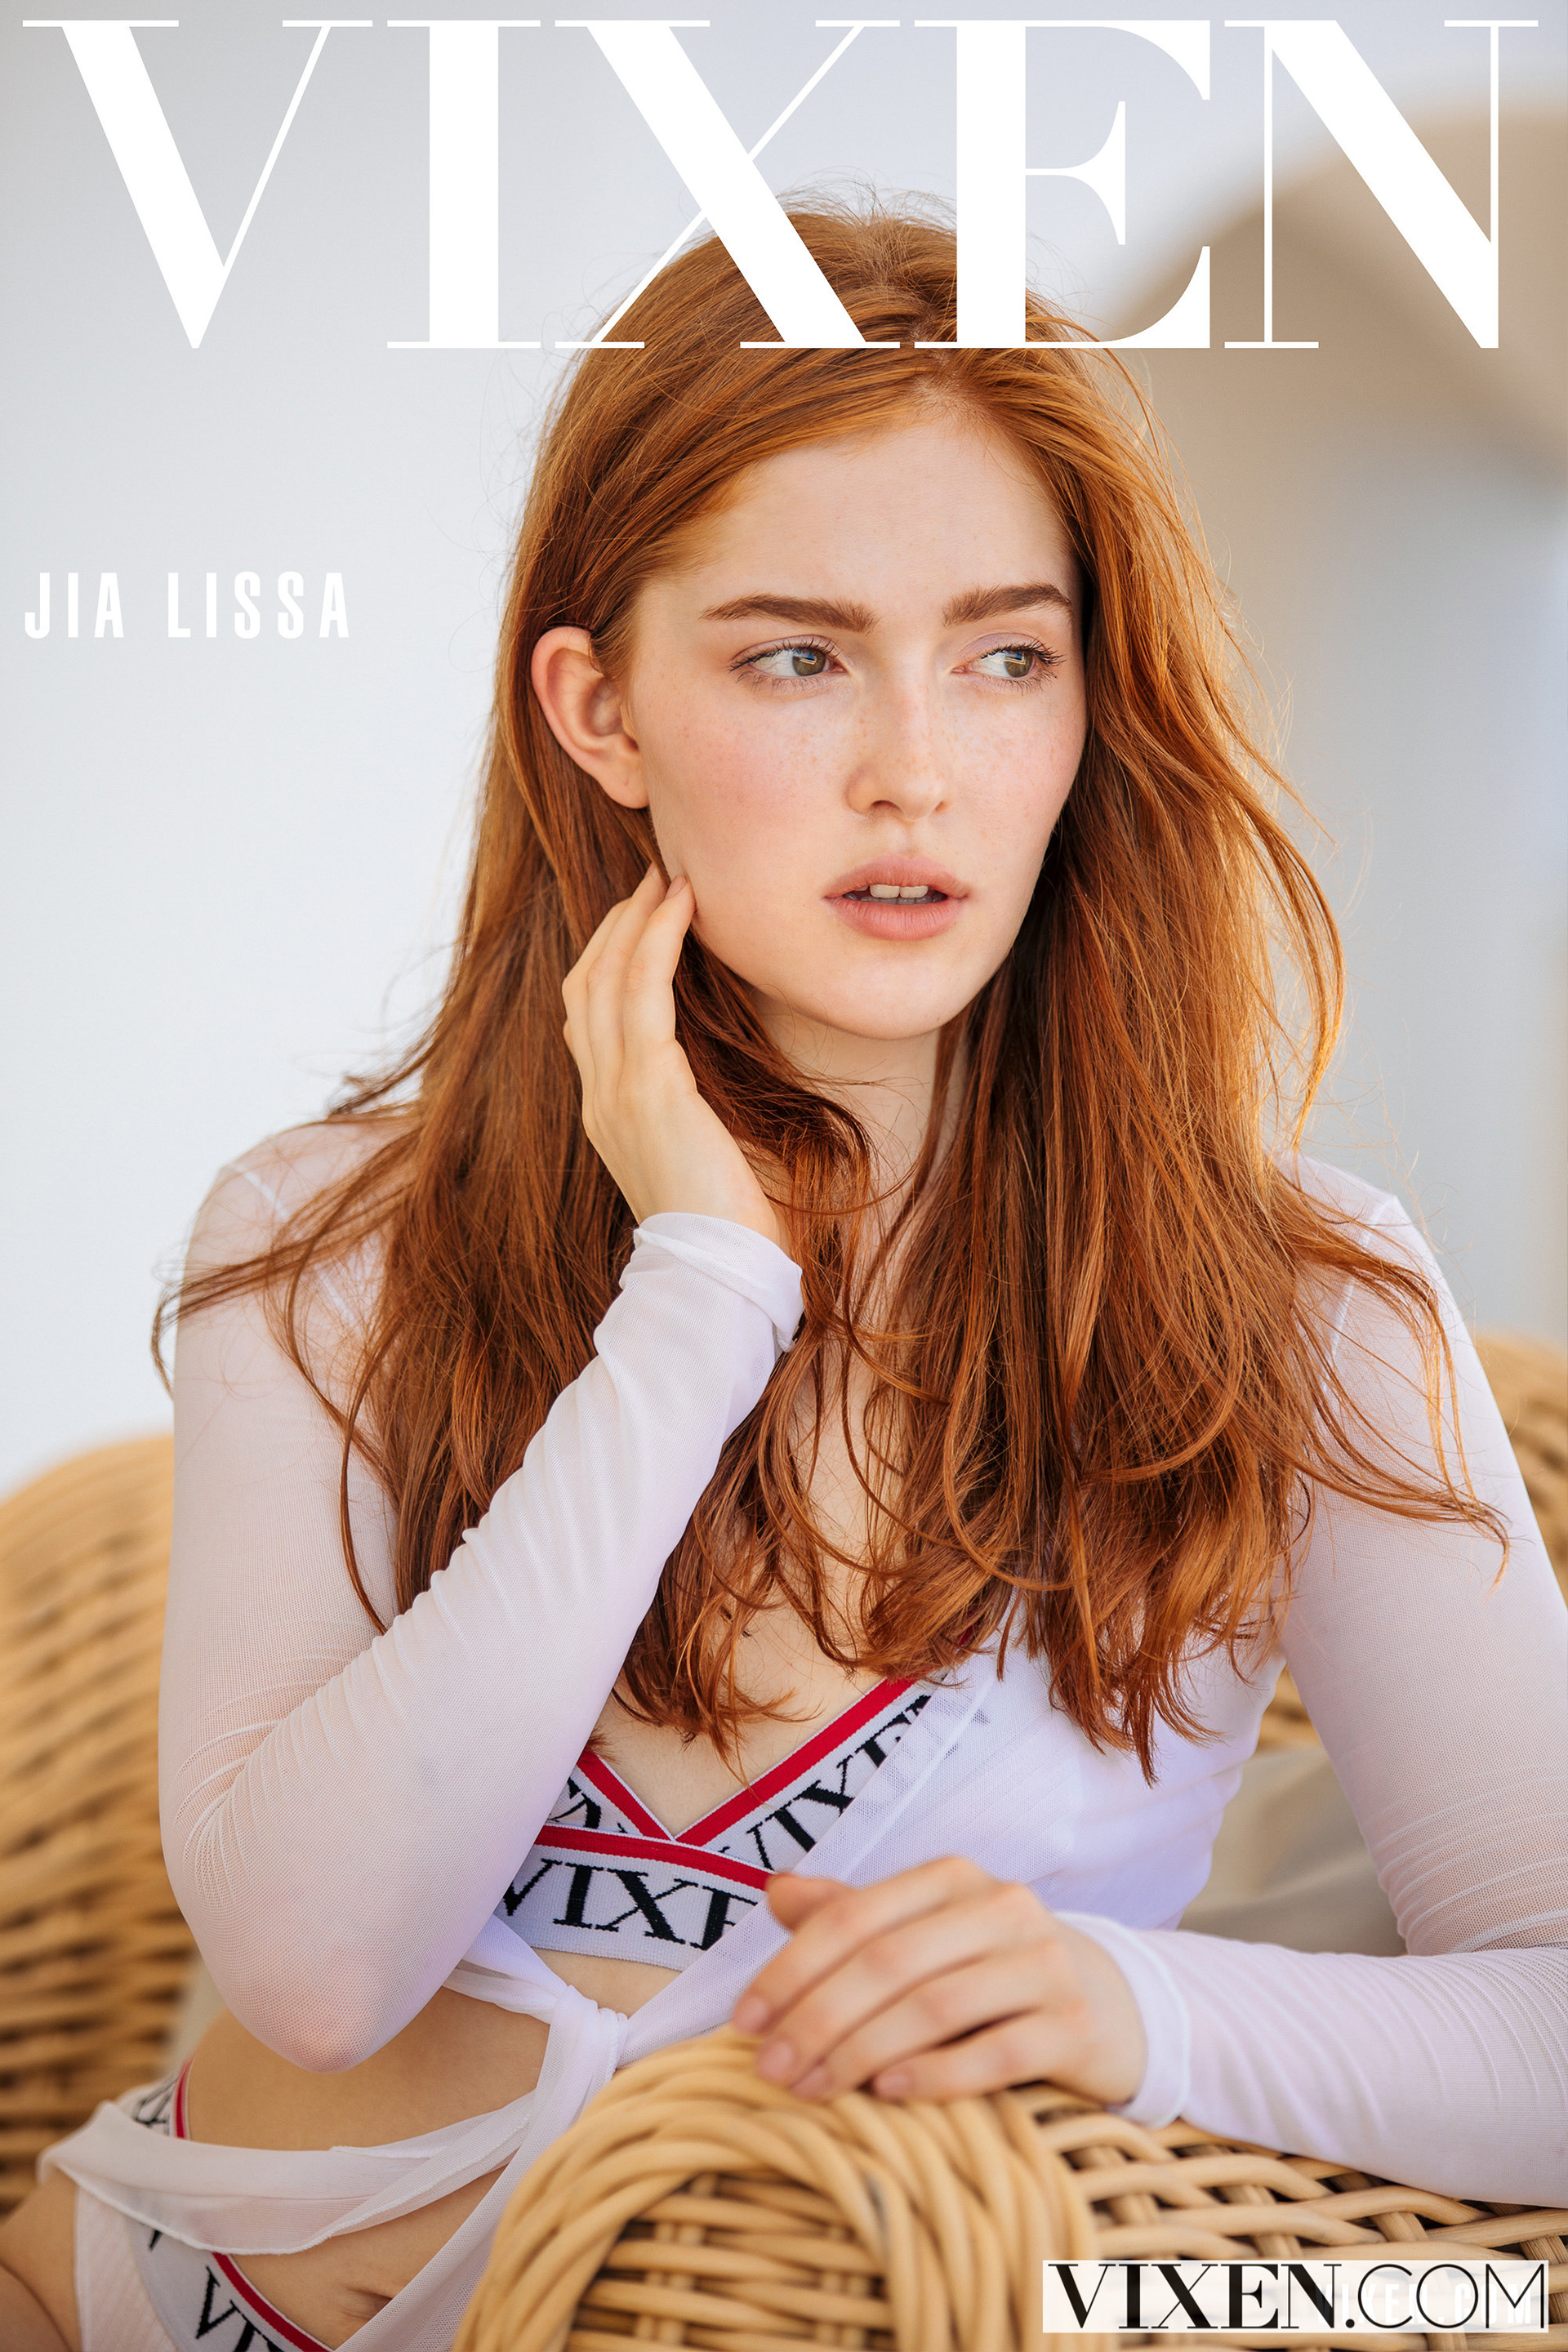 Jia lissa more people